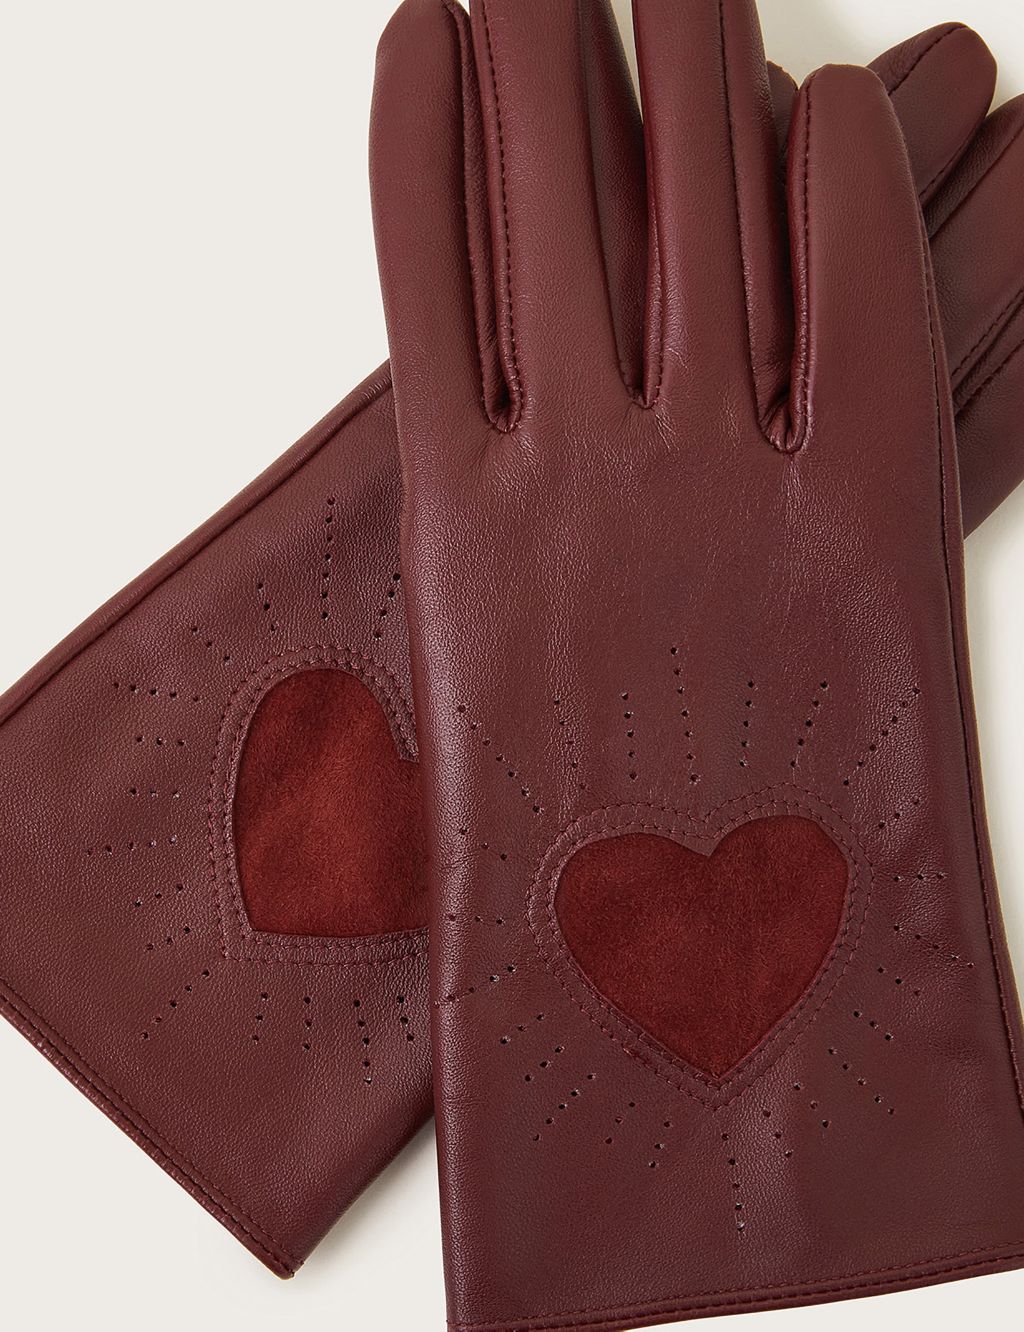 Leather Heart Gloves image 2